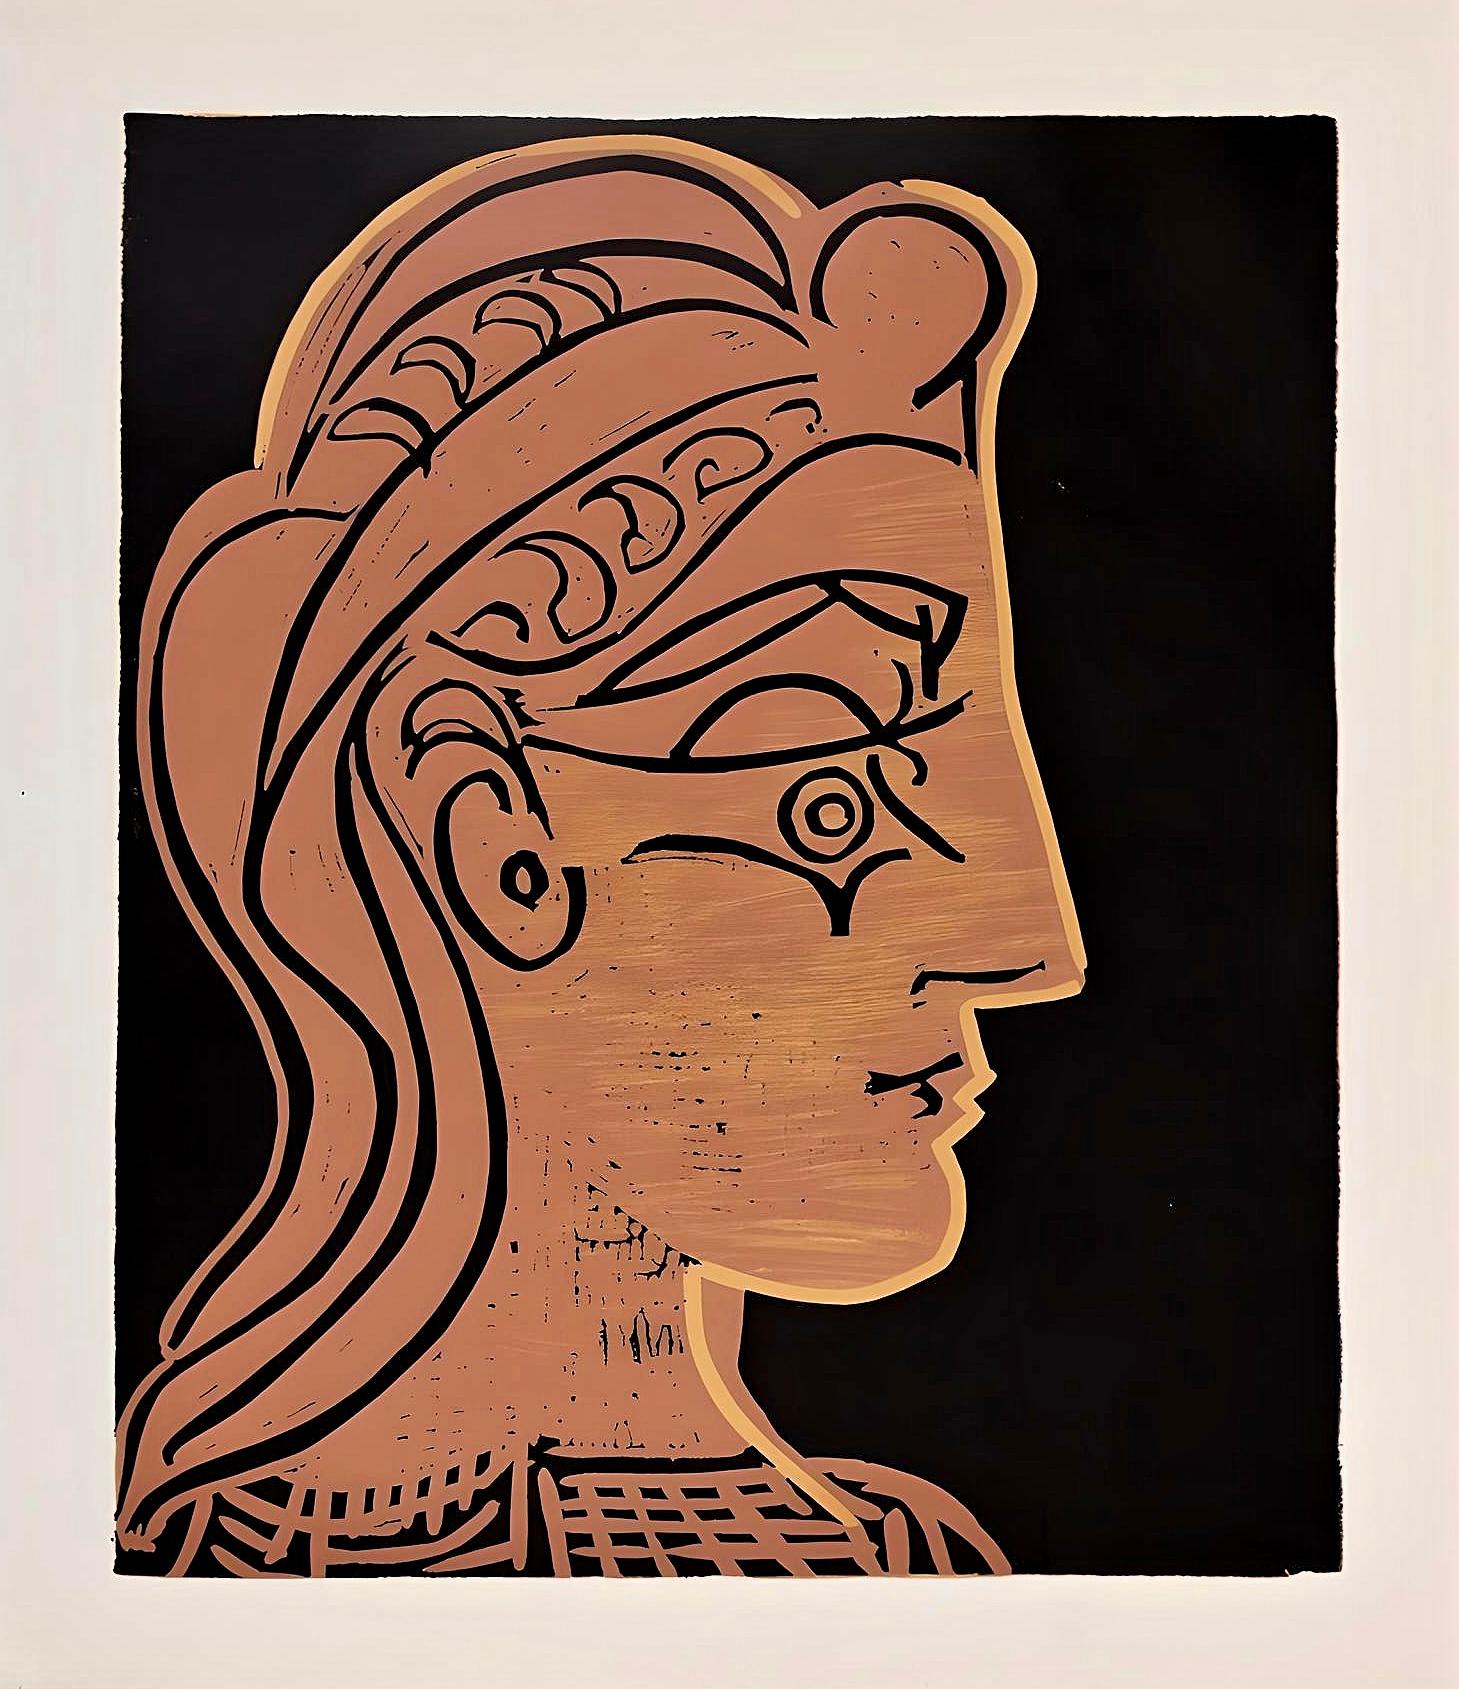 Picasso, Head of a Woman in Profile, Pablo Picasso-Linogravures (after) For Sale 4